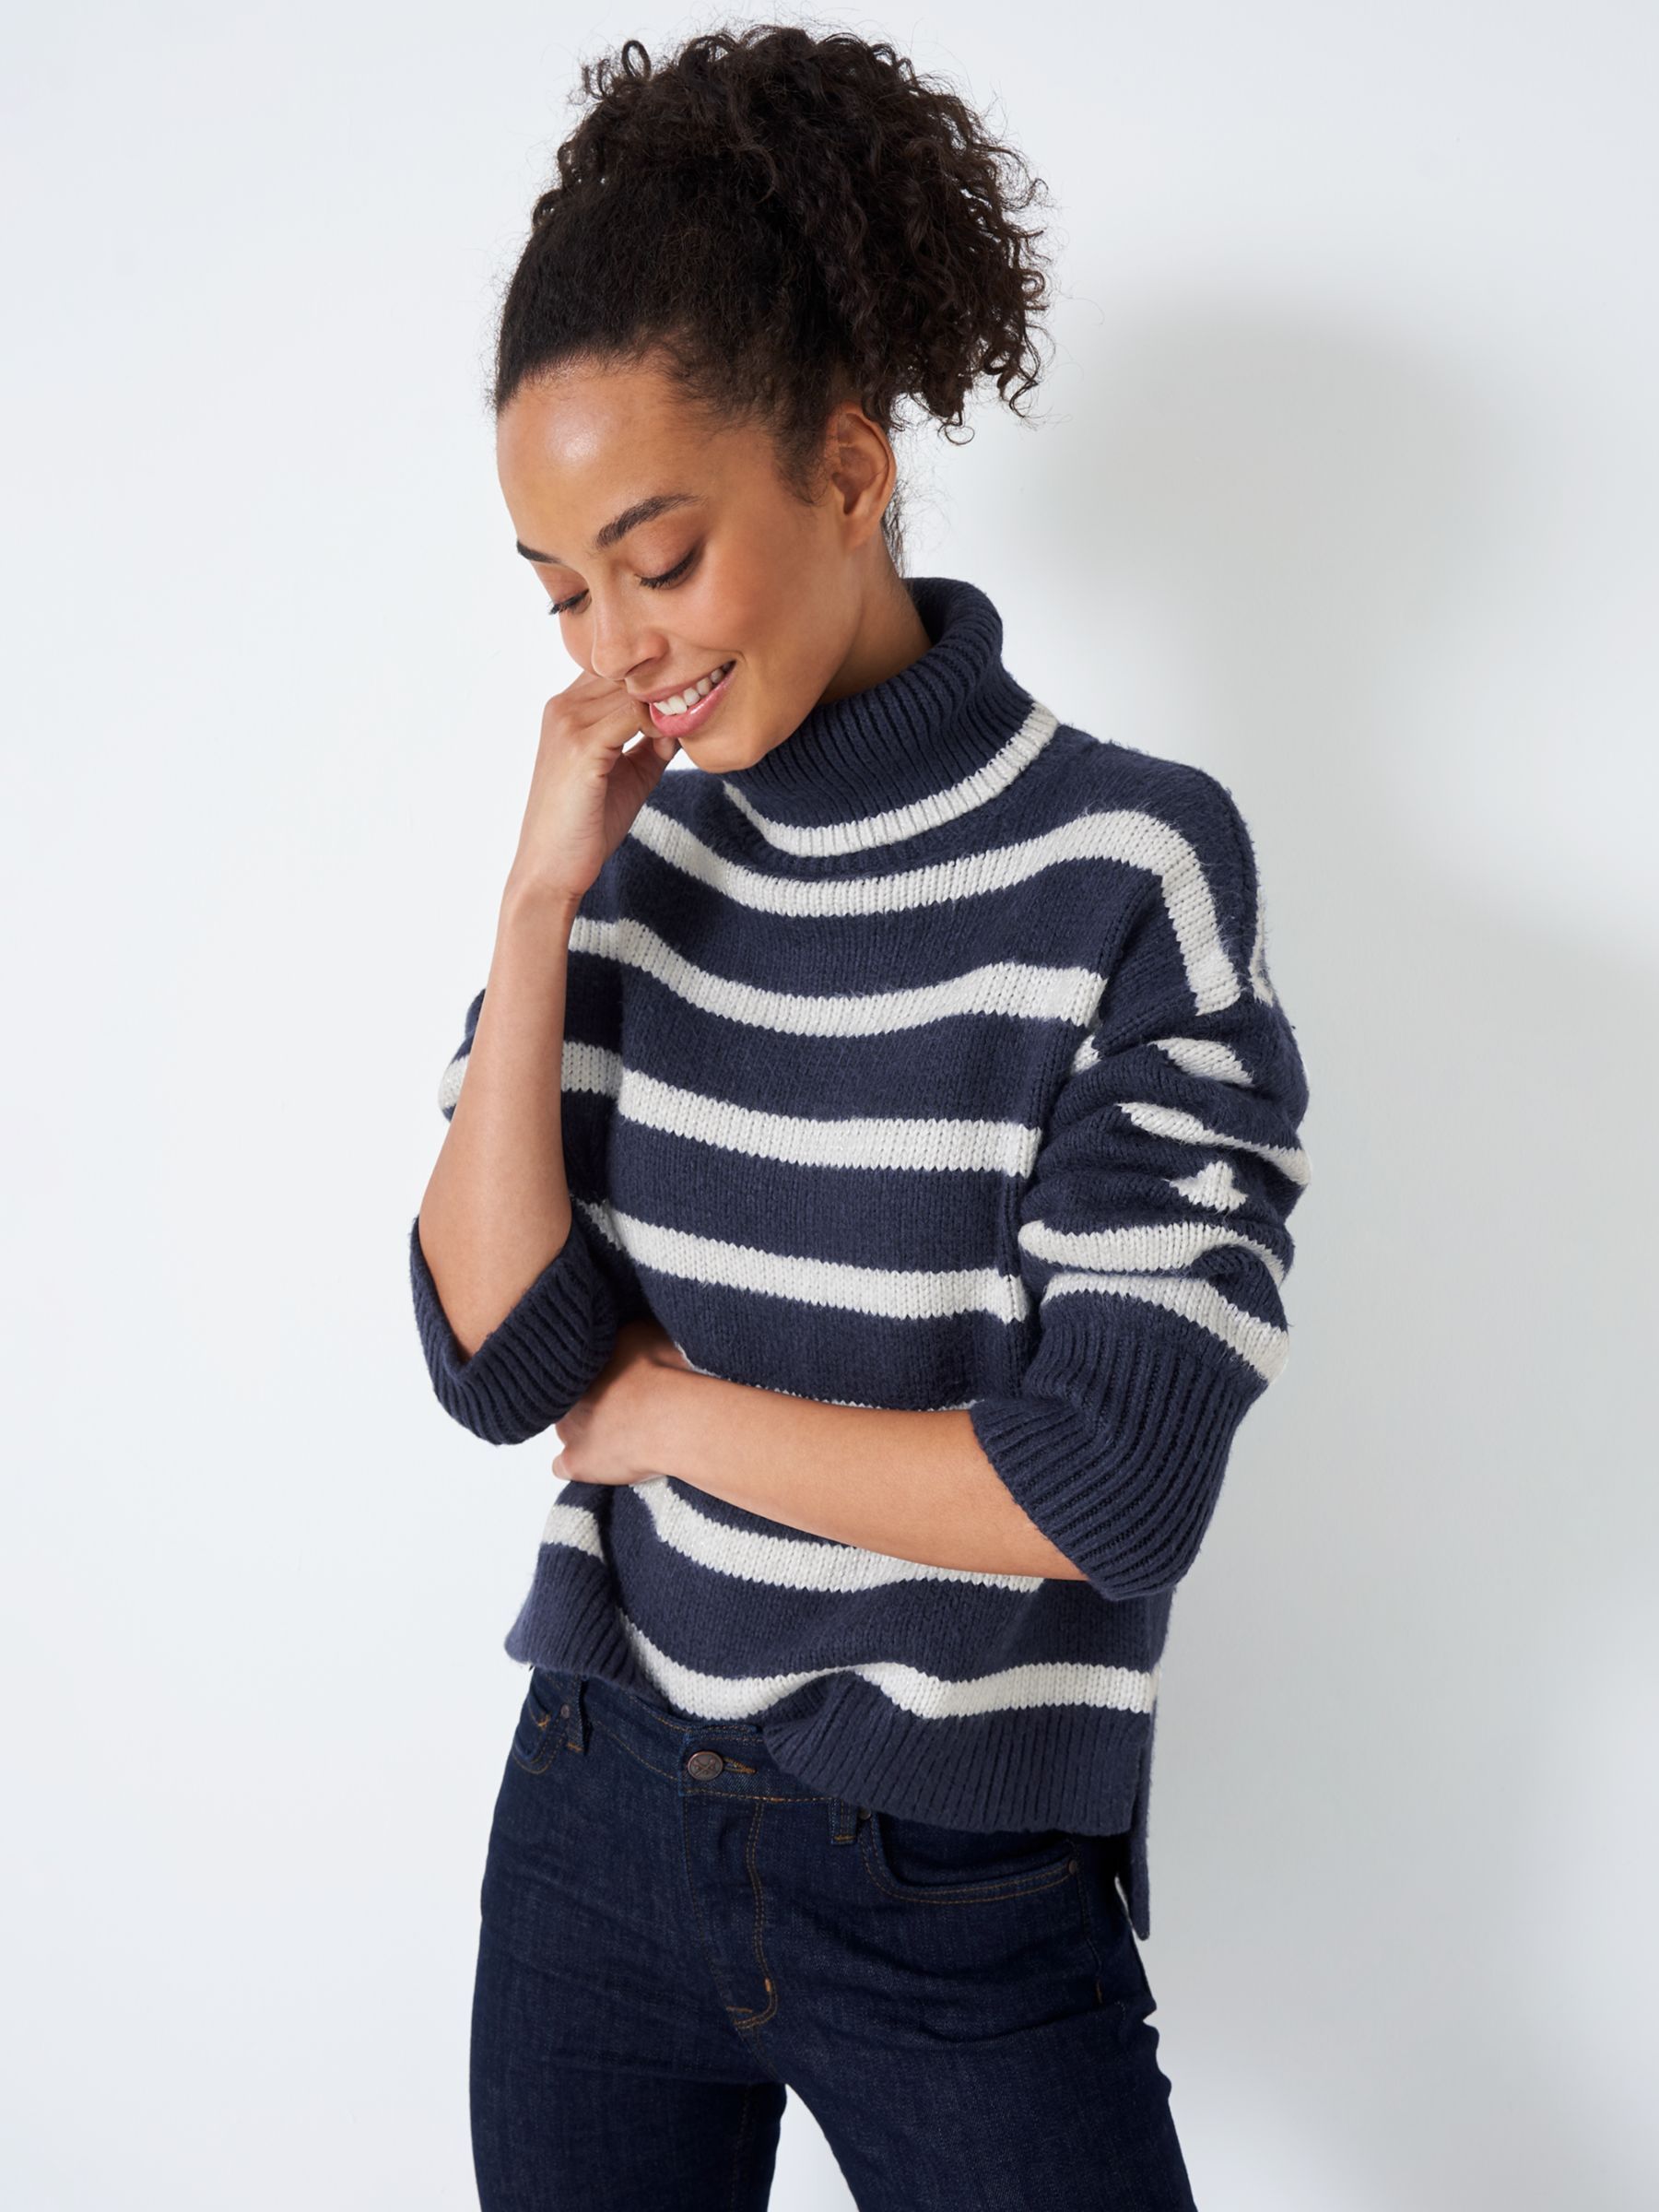 Roll Neck Jumpers | John Lewis & Partners